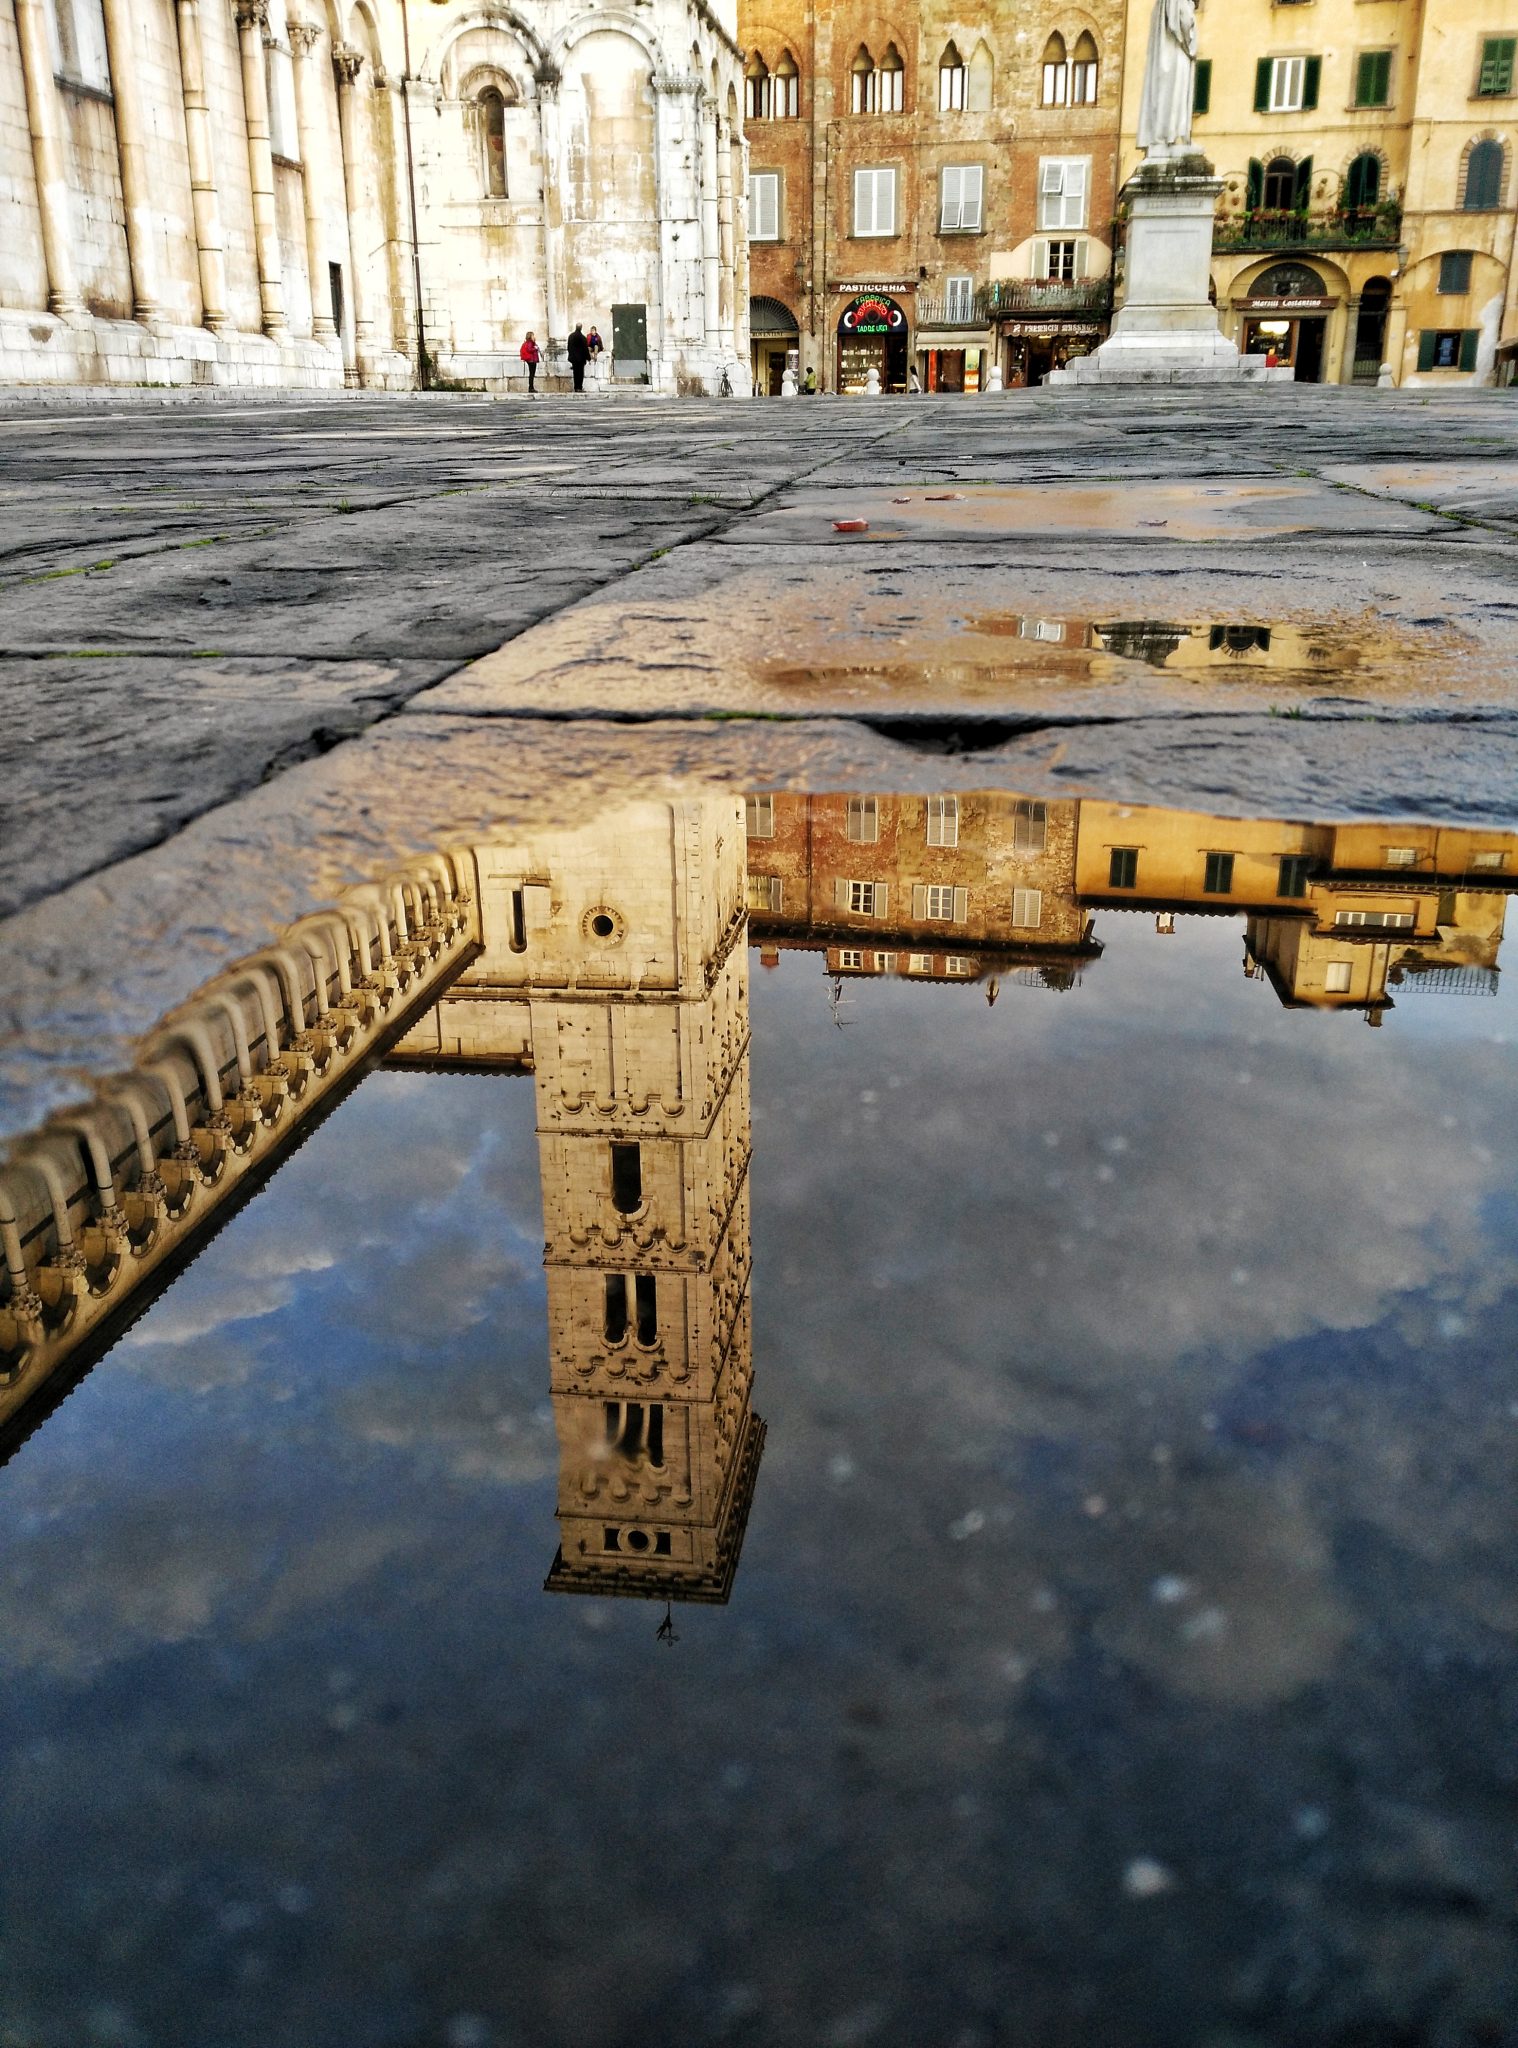 Mobile phone photo of church tower in Lucca reflected in a puddle.